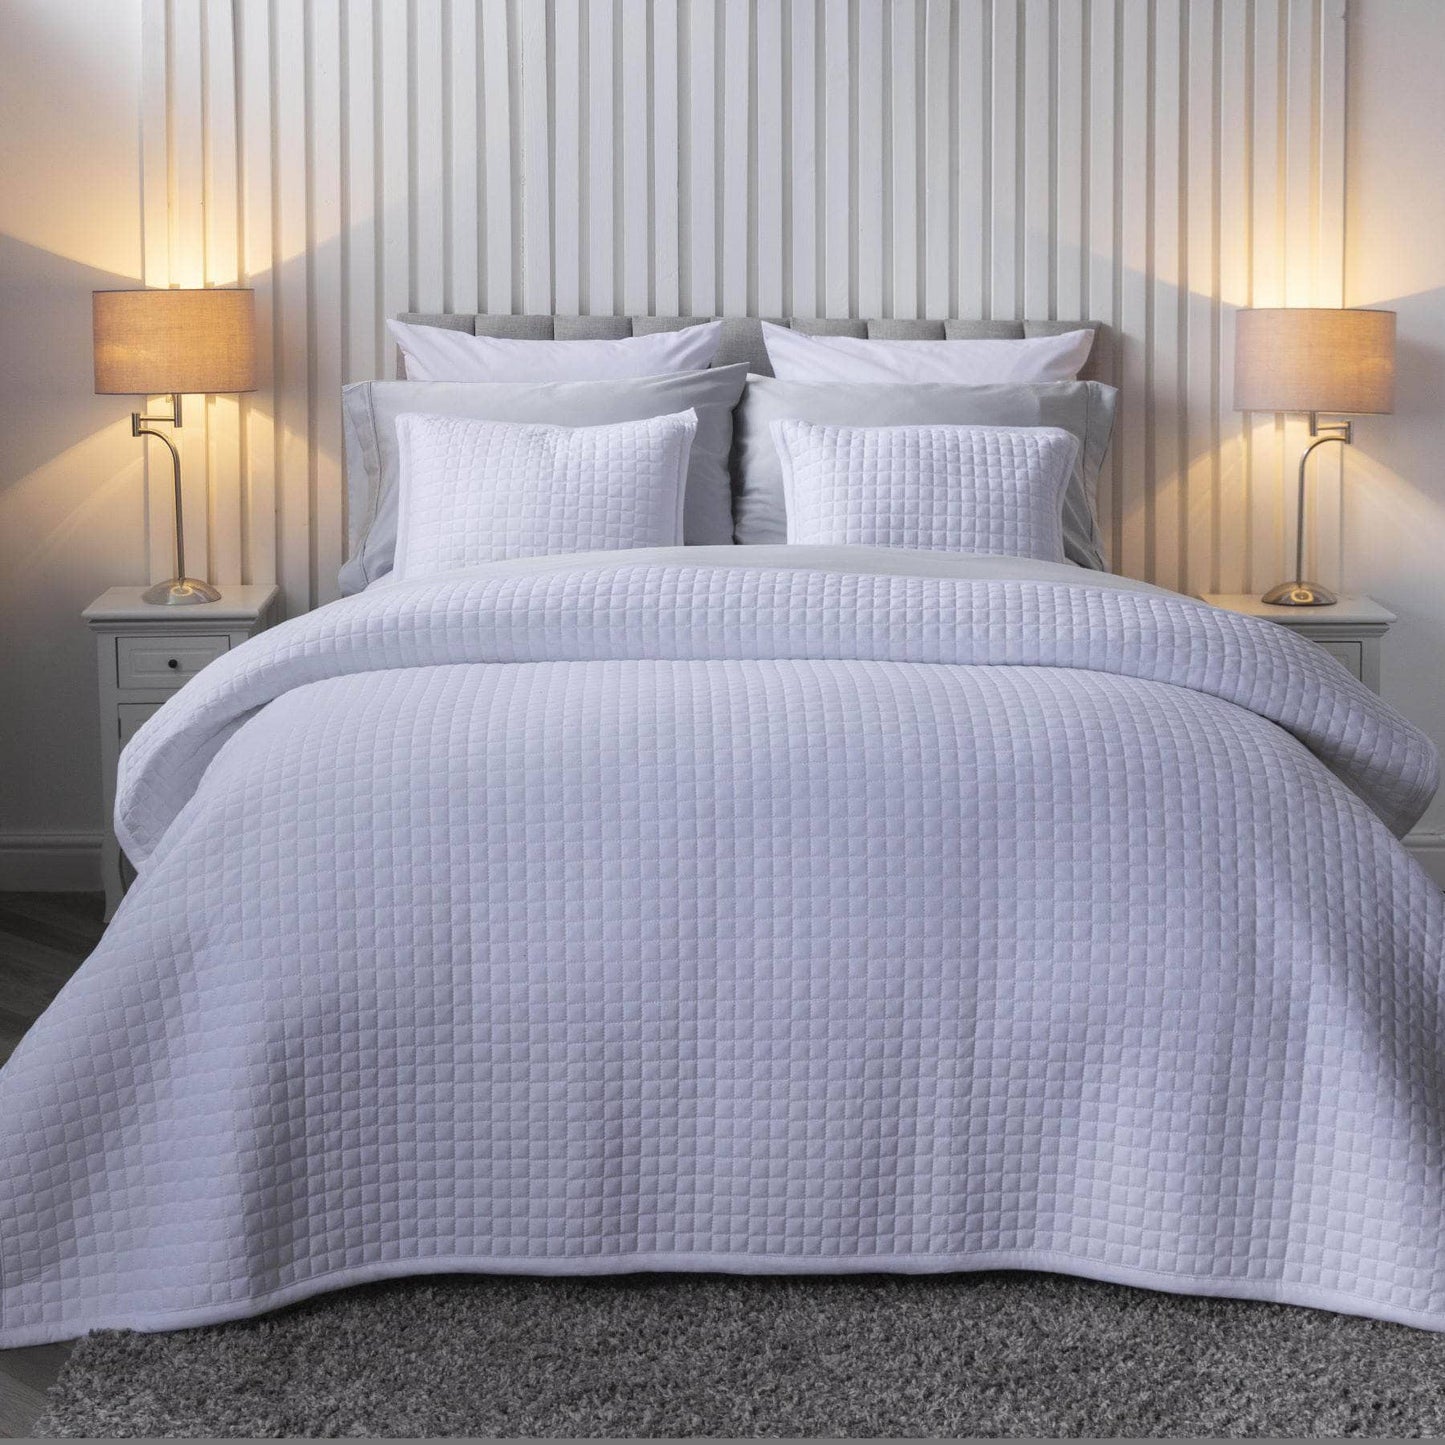 Homeware  -  Compton Quilted Throw - White  -  60009950